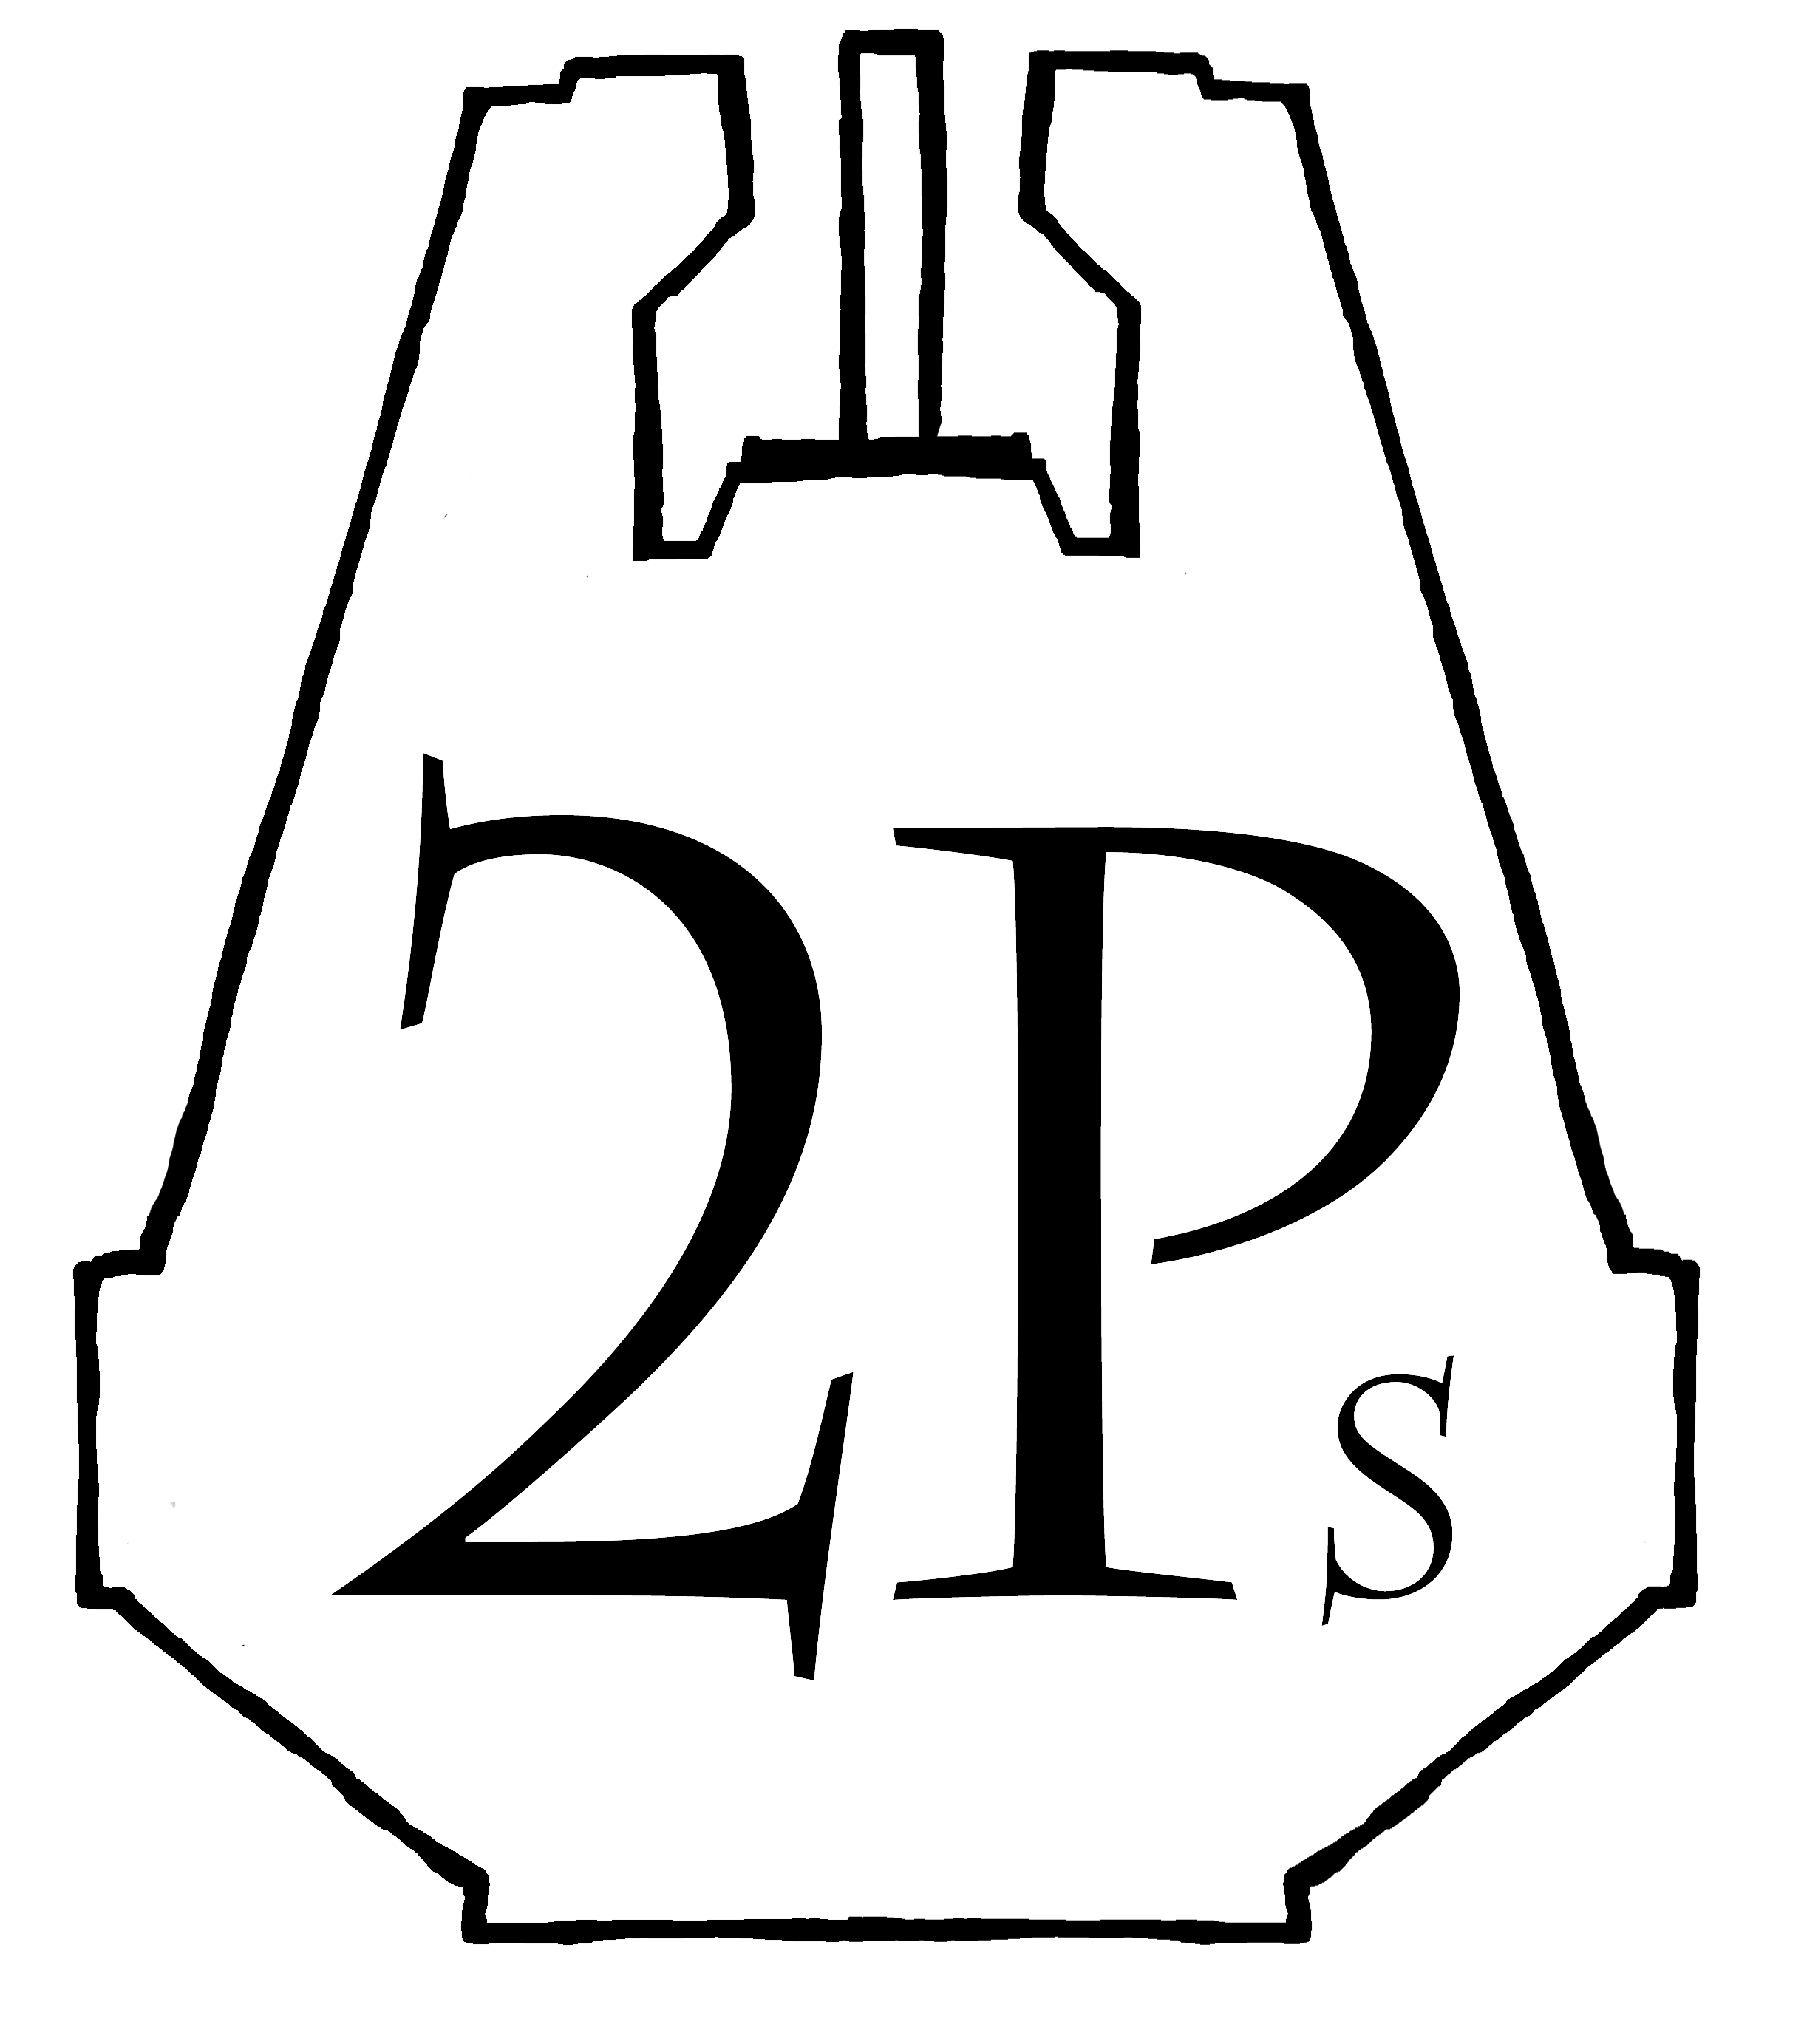 87-2ps-logo-with-s-see-through-1.png